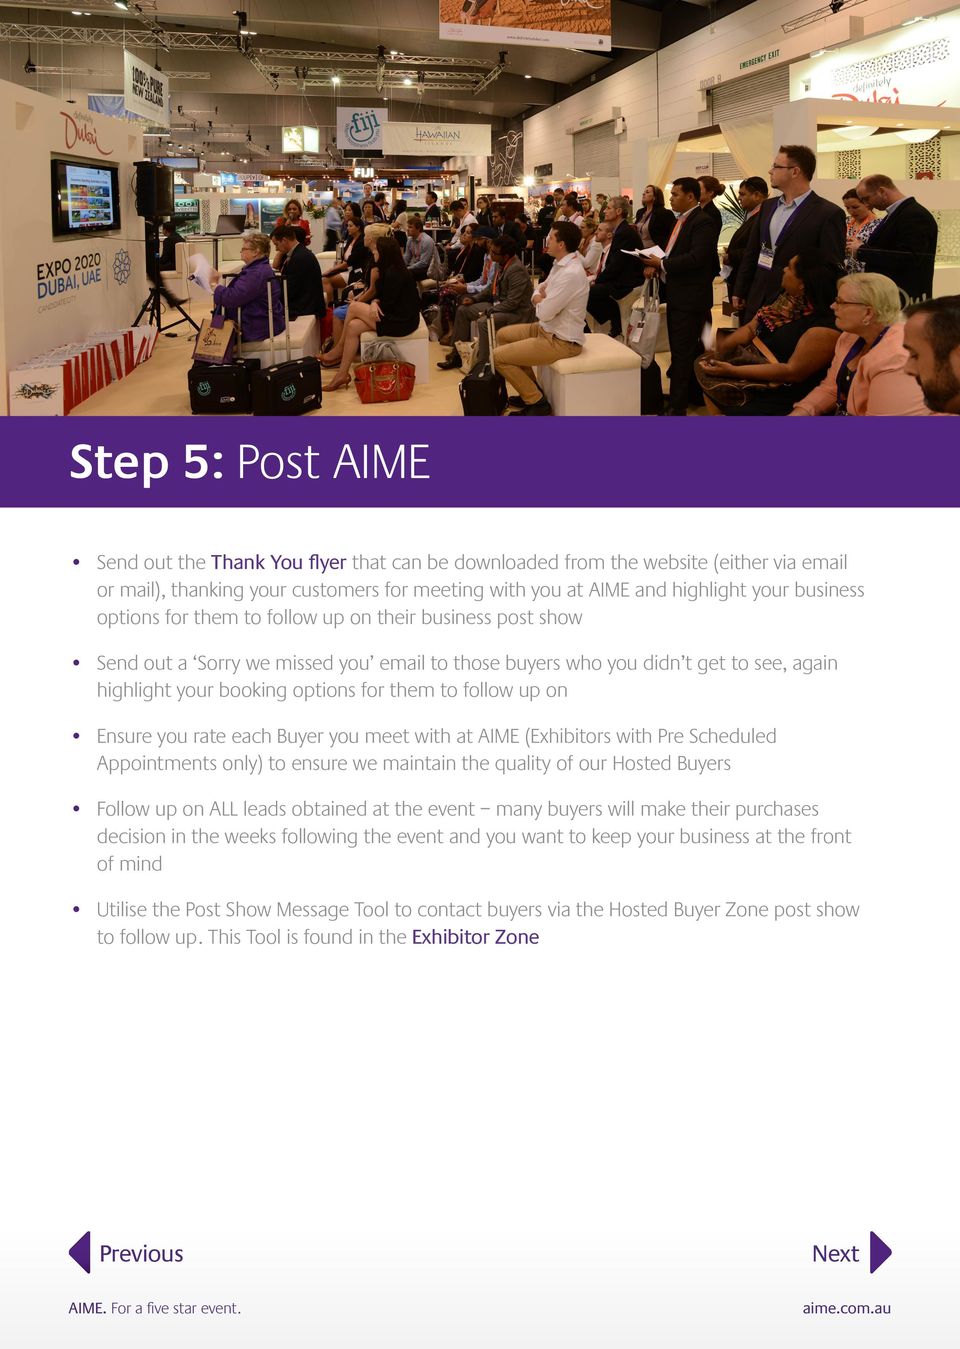 Ensure you rate each Buyer you meet with at AIME (Exhibitors with Pre Scheduled Appointments only) to ensure we maintain the quality of our Hosted Buyers Follow up on ALL leads obtained at the event